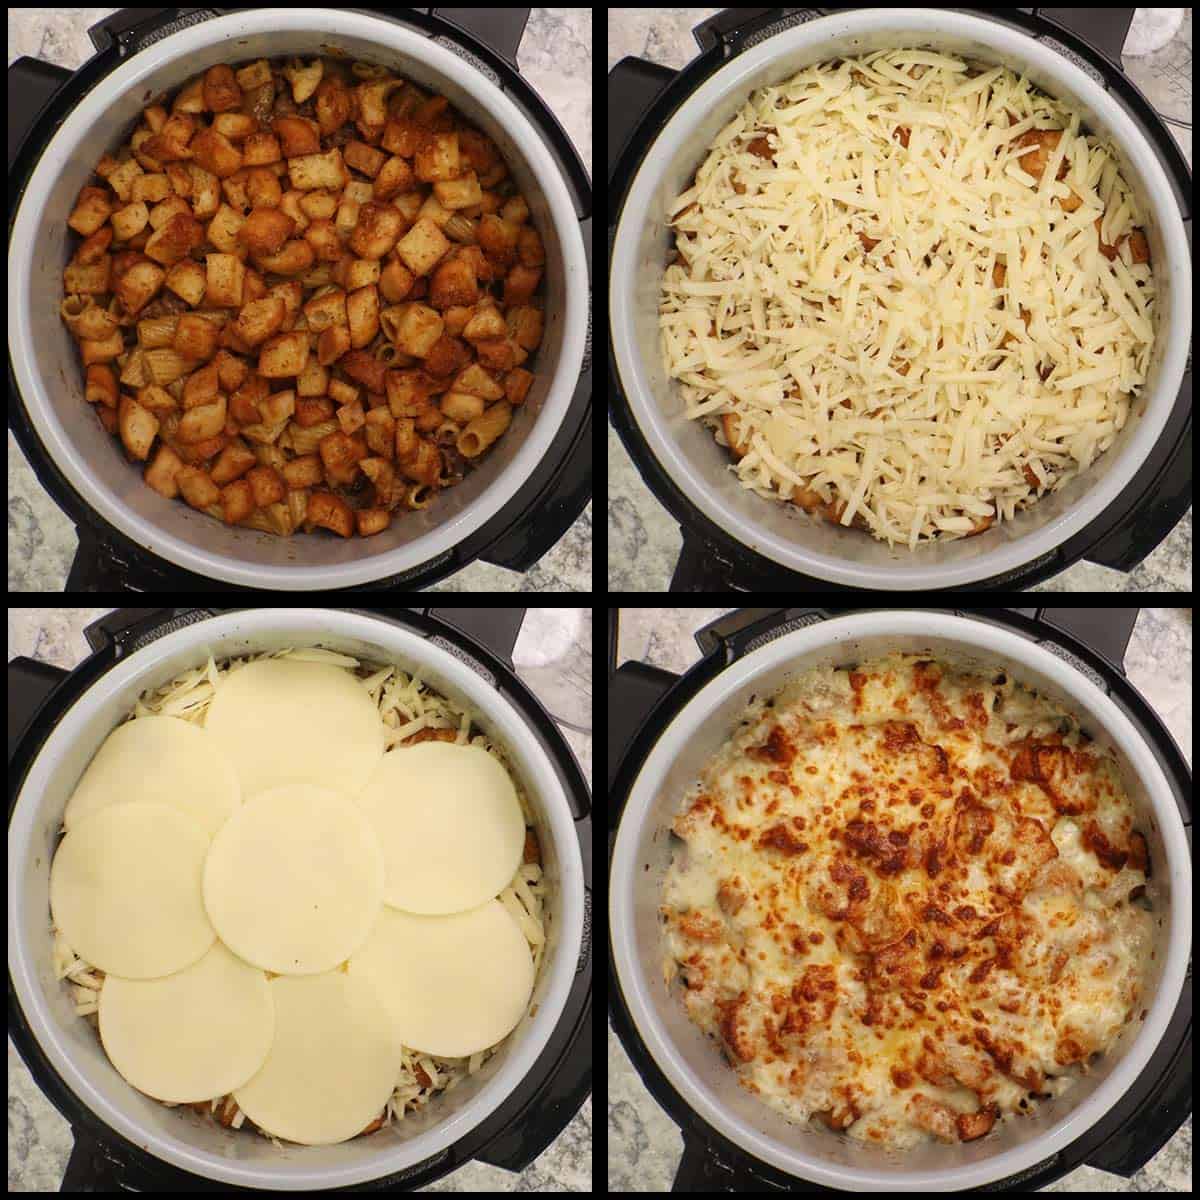 adding the croutons and cheese to the top of the french onion pasta.